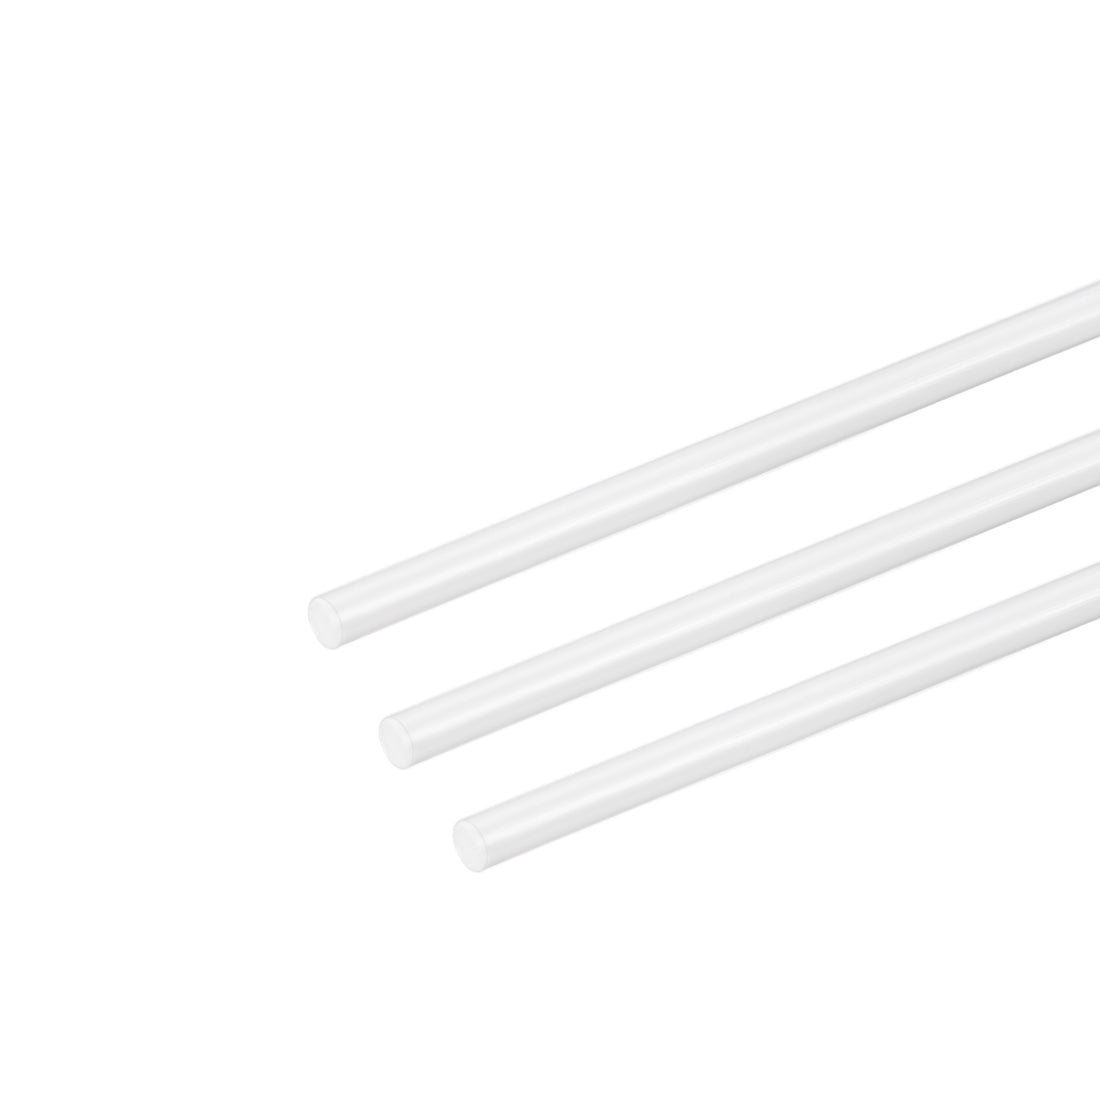 uxcell Uxcell 3mm × 20" ABS Plastic Round Bar Rod for Architectural Model Making DIY 3pcs